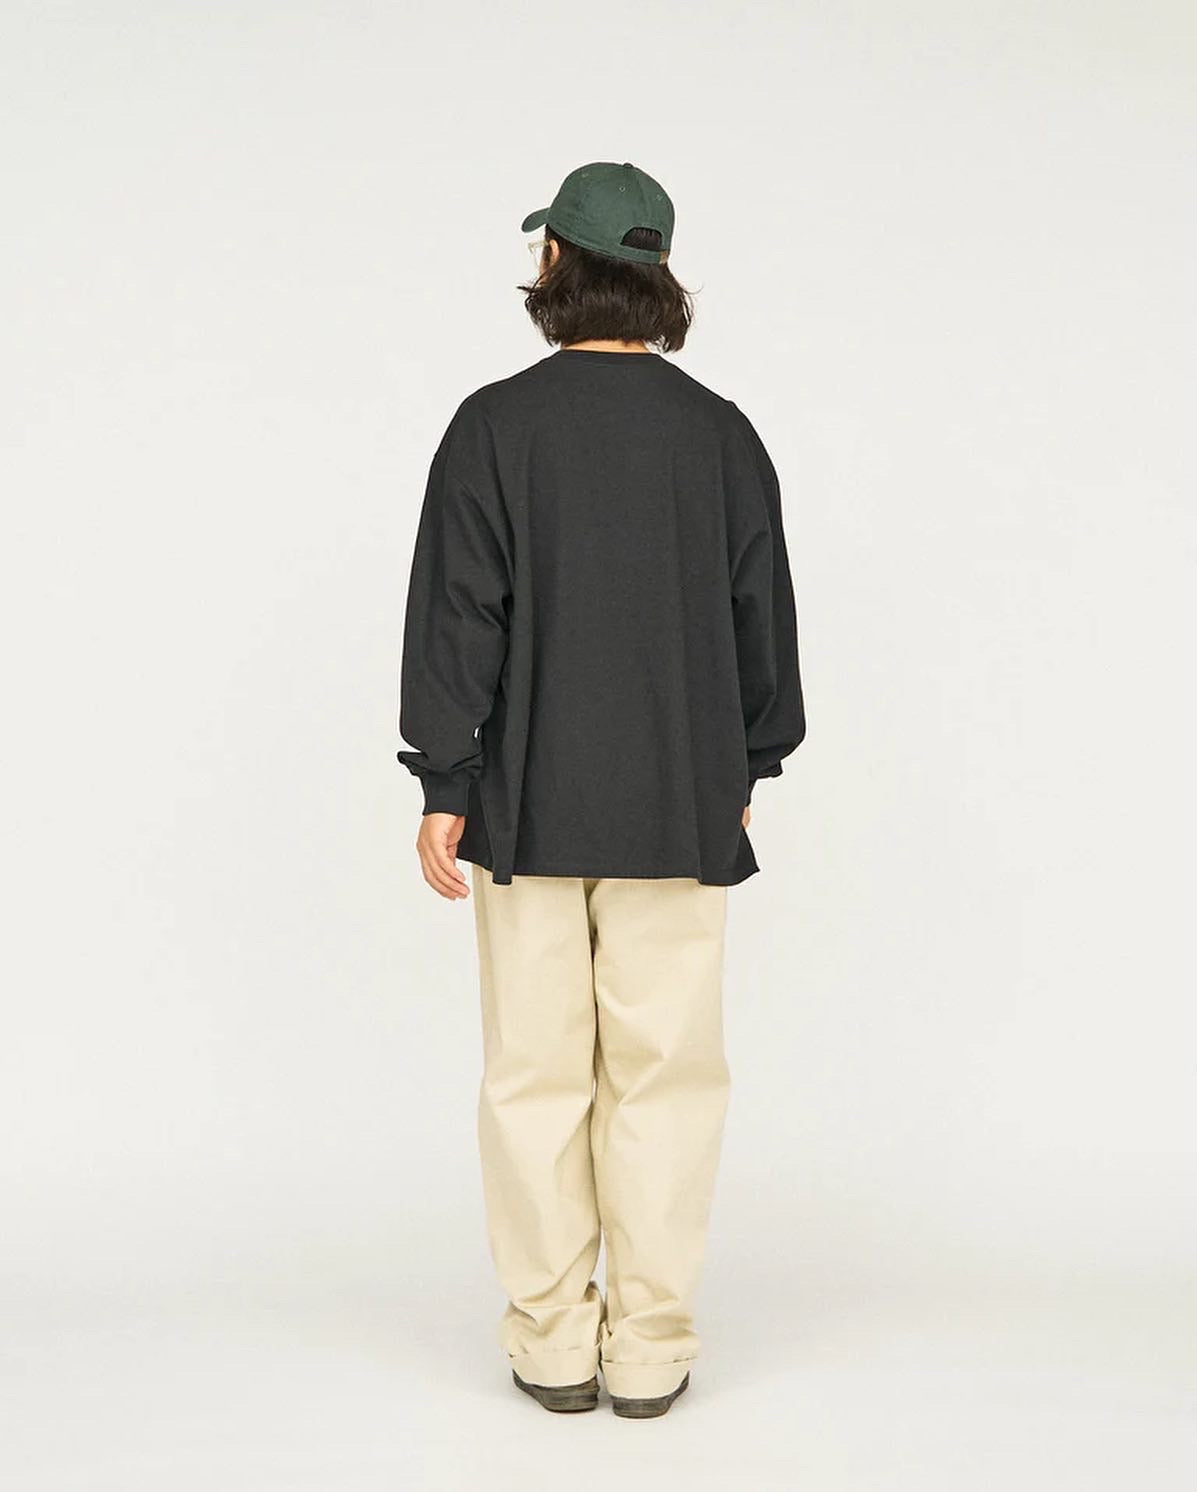 2-PACK OVERSIZED L/S TEE